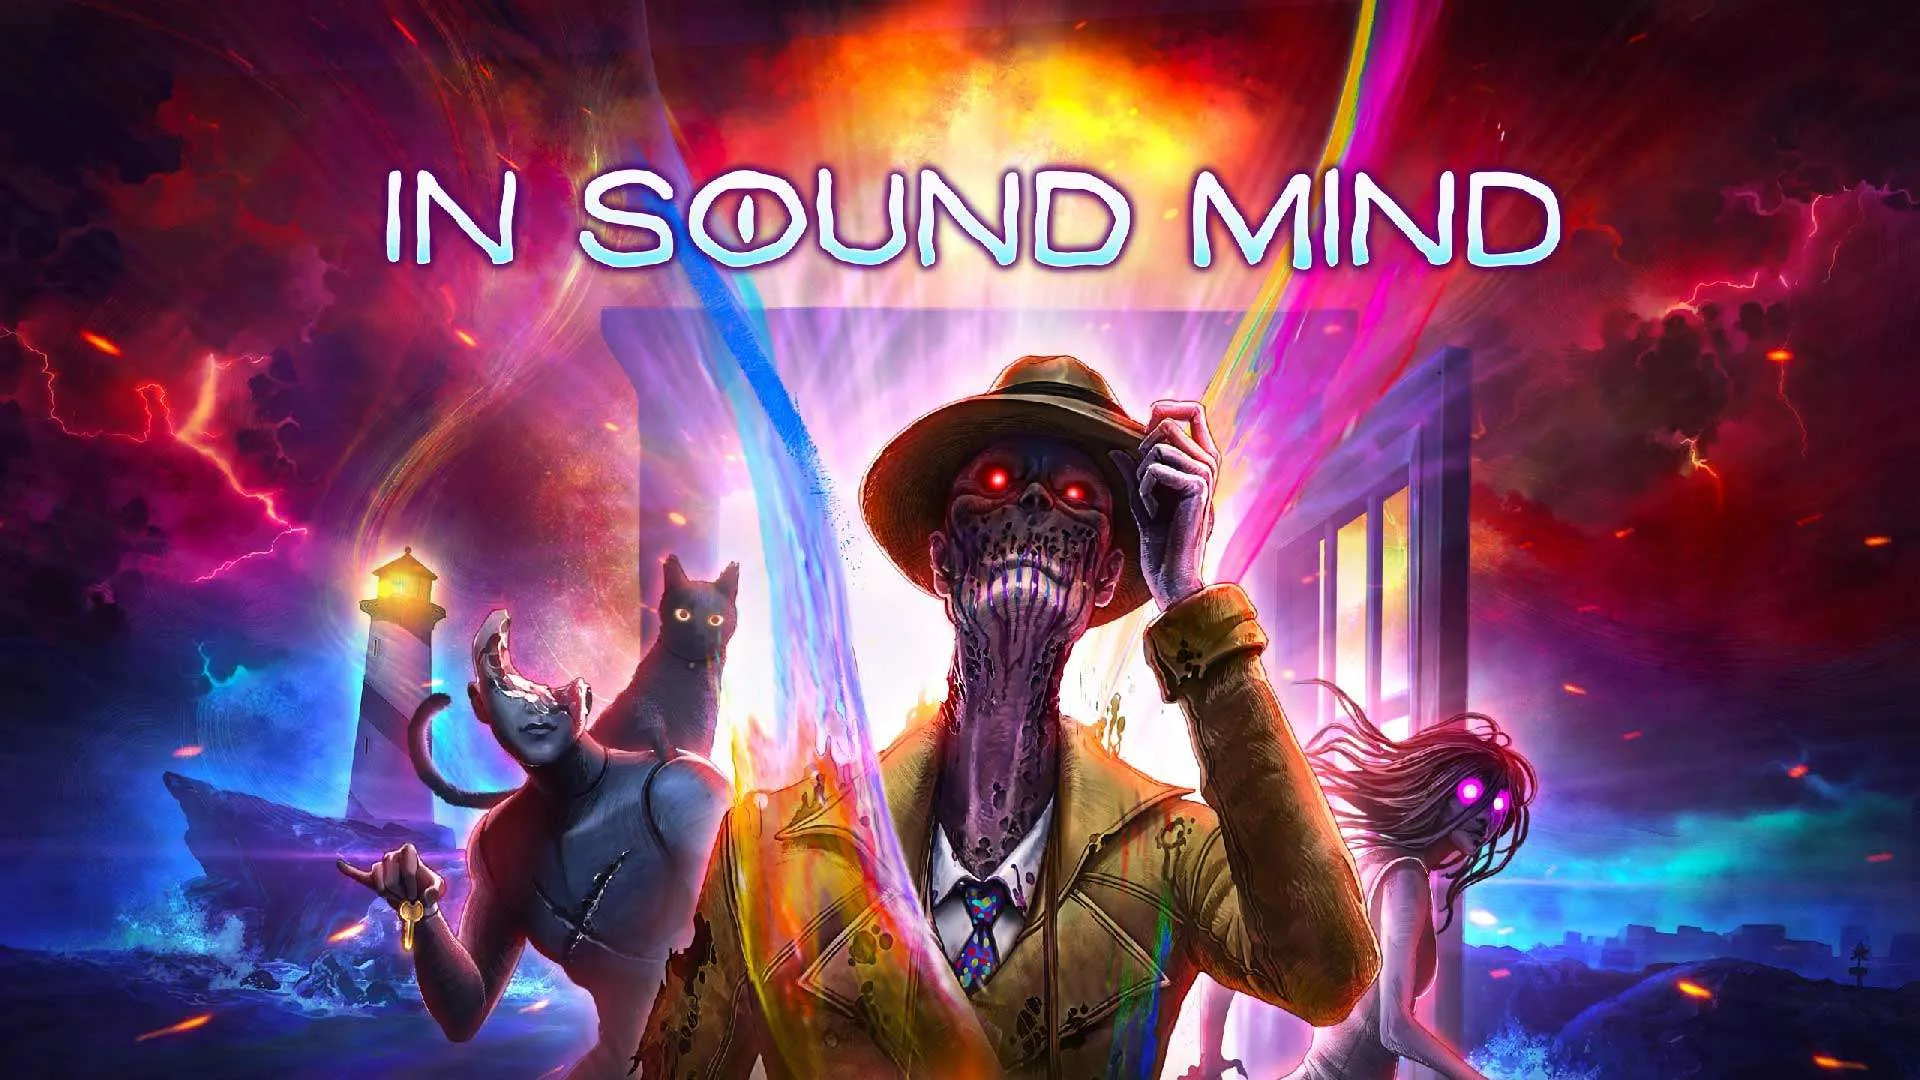 In Sound Mind is free at Epic Games Store